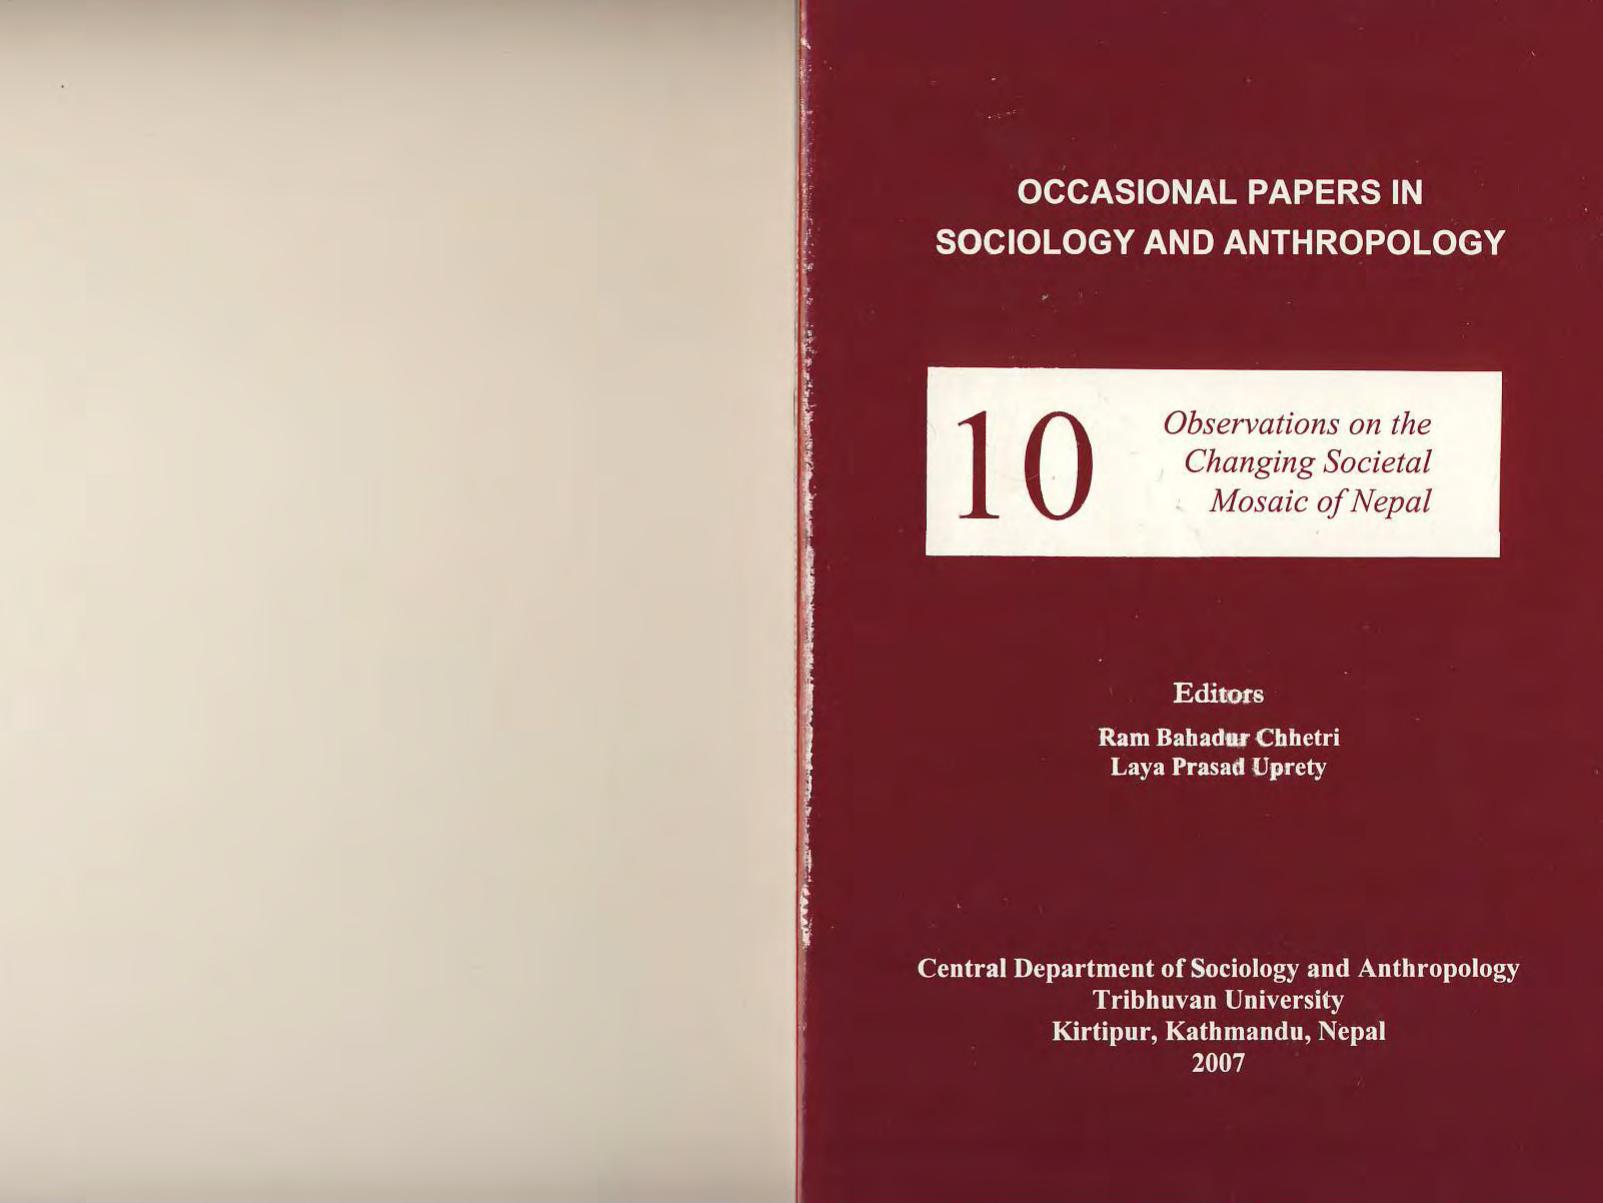 Occasional Papers in Sociology and Anthropology - Volume 10